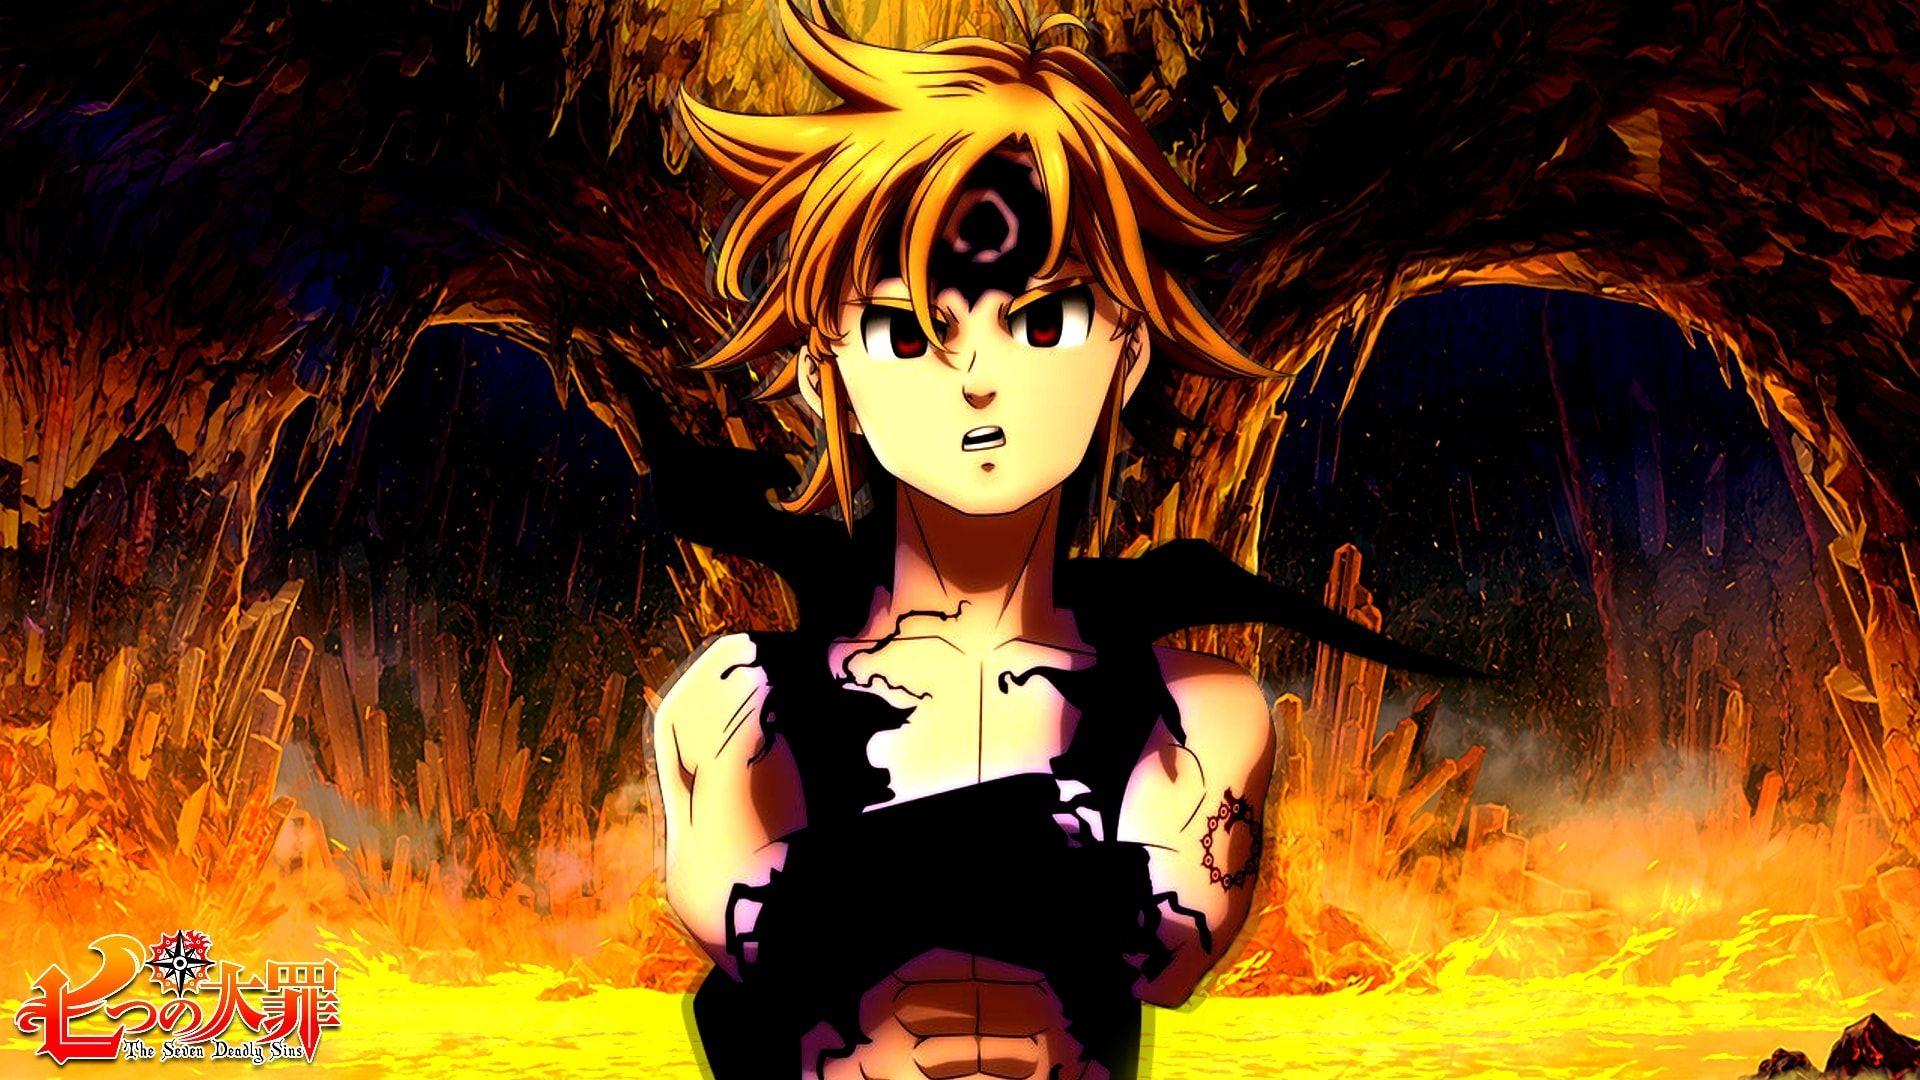 The Seven Deadly Sins Anime Wallpapers - Wallpaper Cave